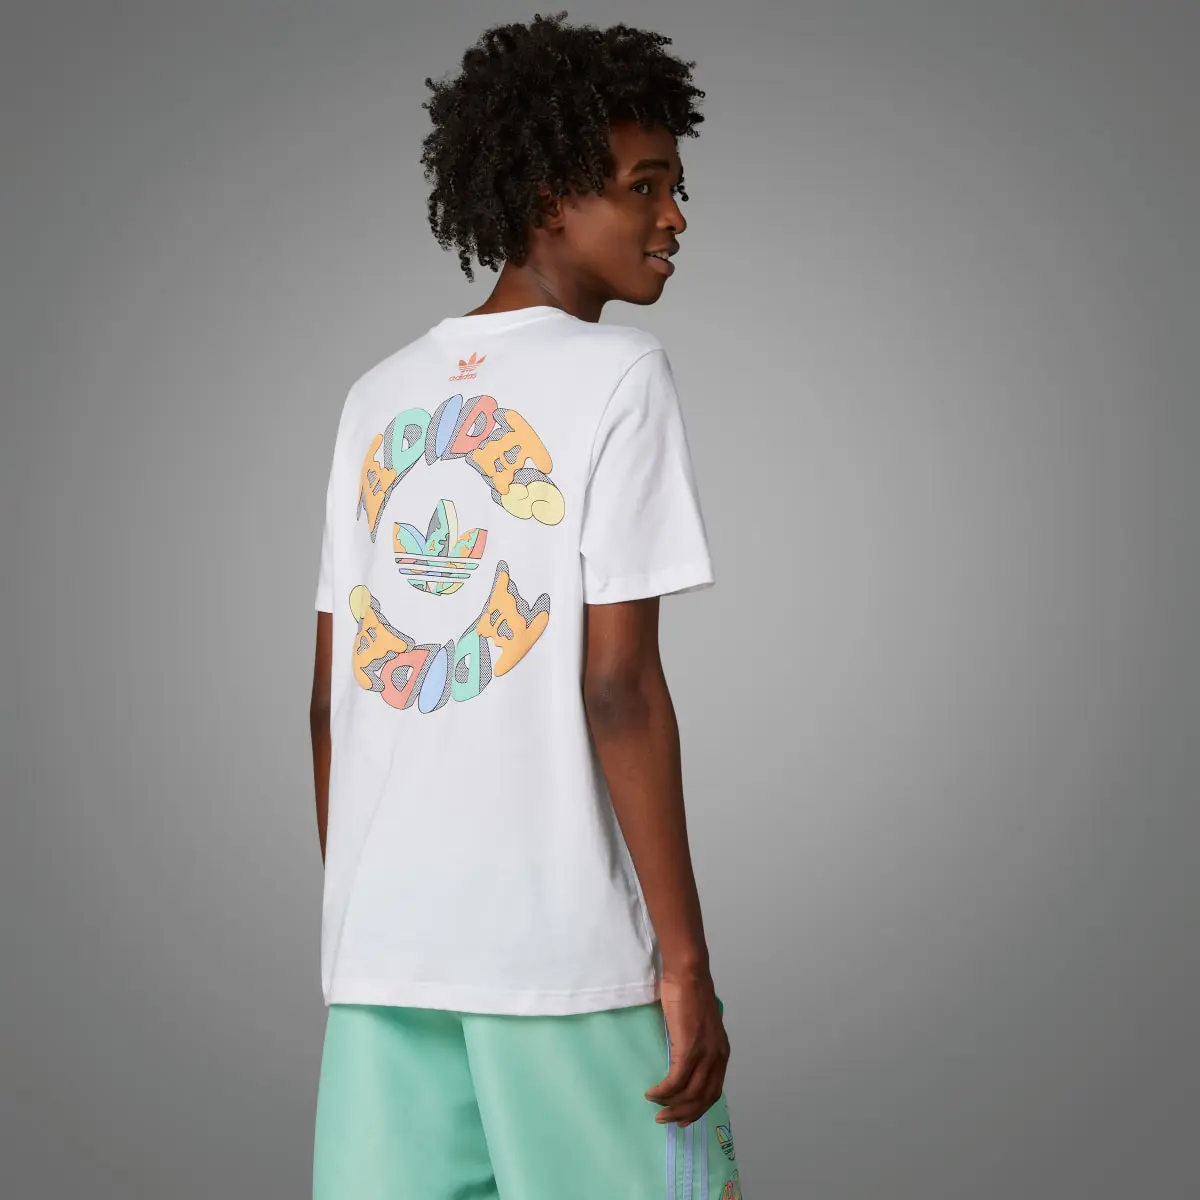 Adidas Enjoy Summer Front/Back Graphic Tee. 2